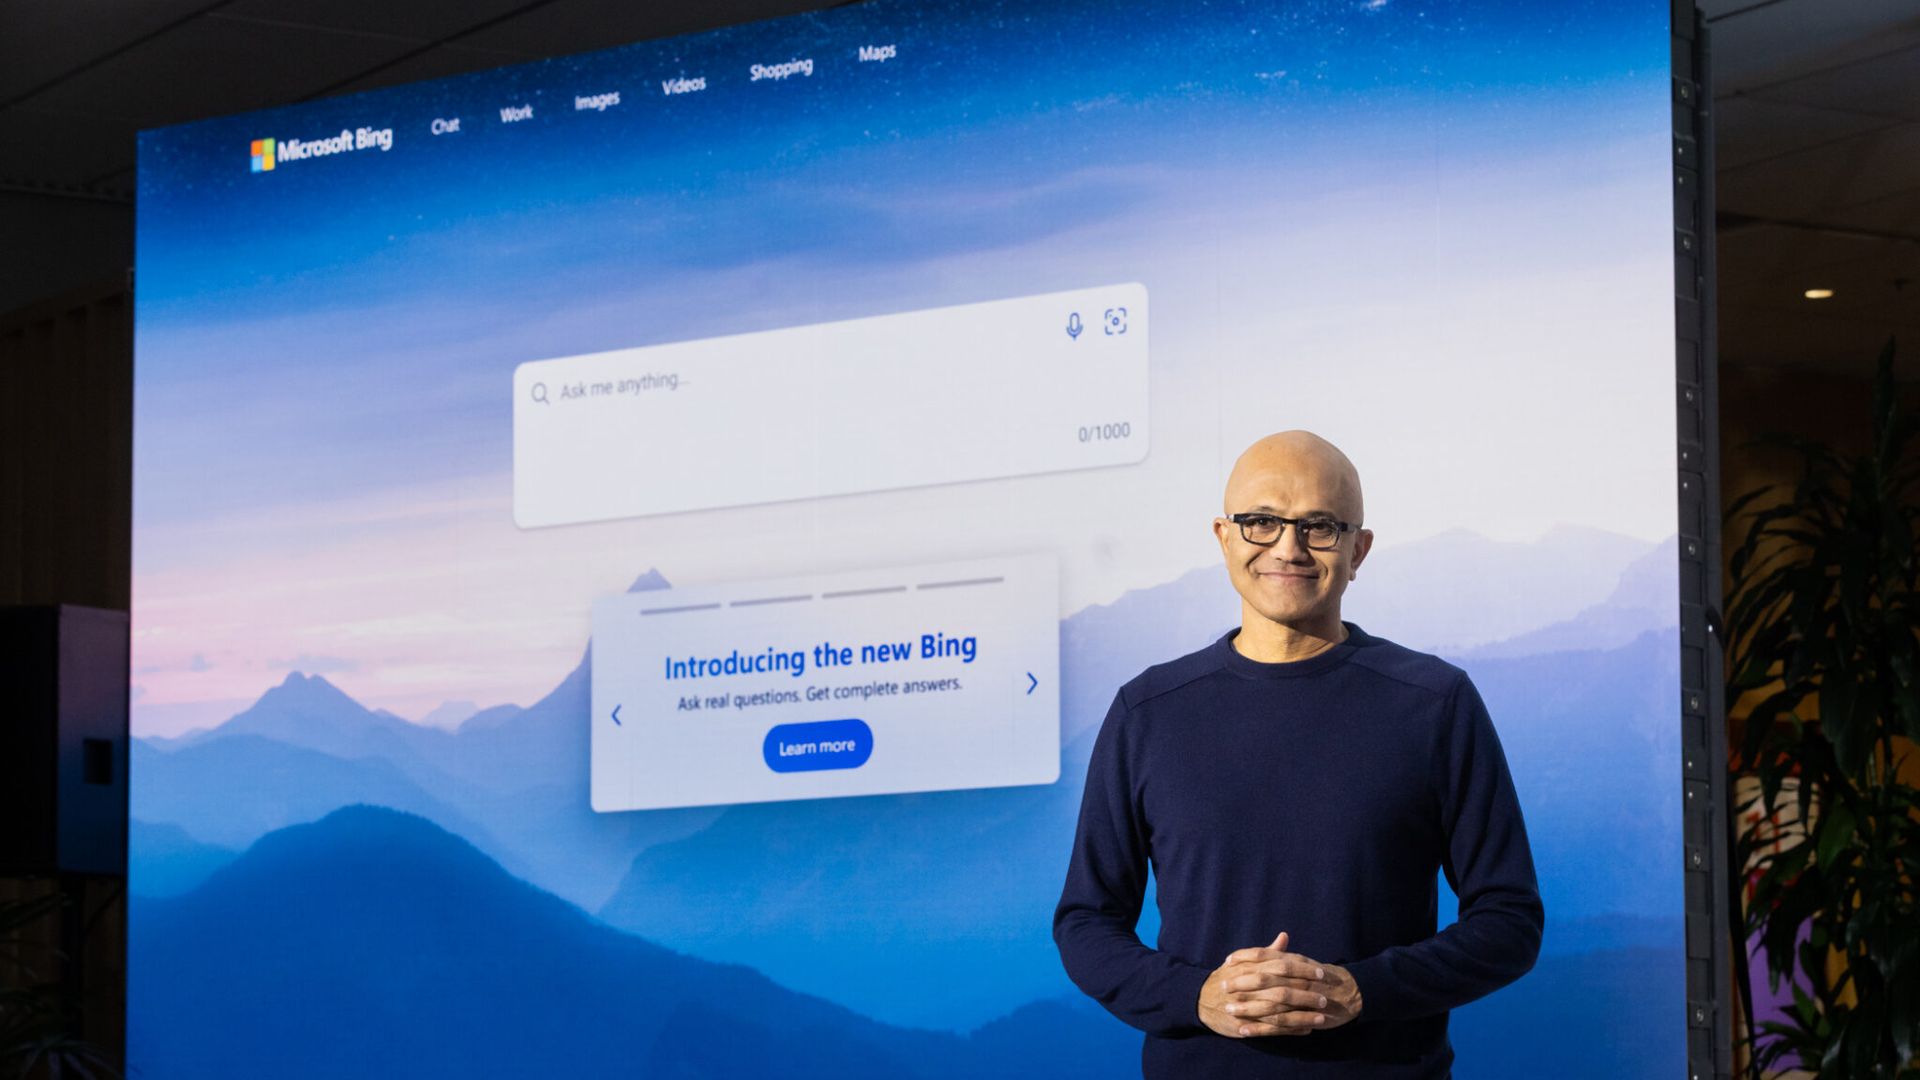 Microsoft CEO Satya Nadella standing in front of the AI-infused Bing search engine